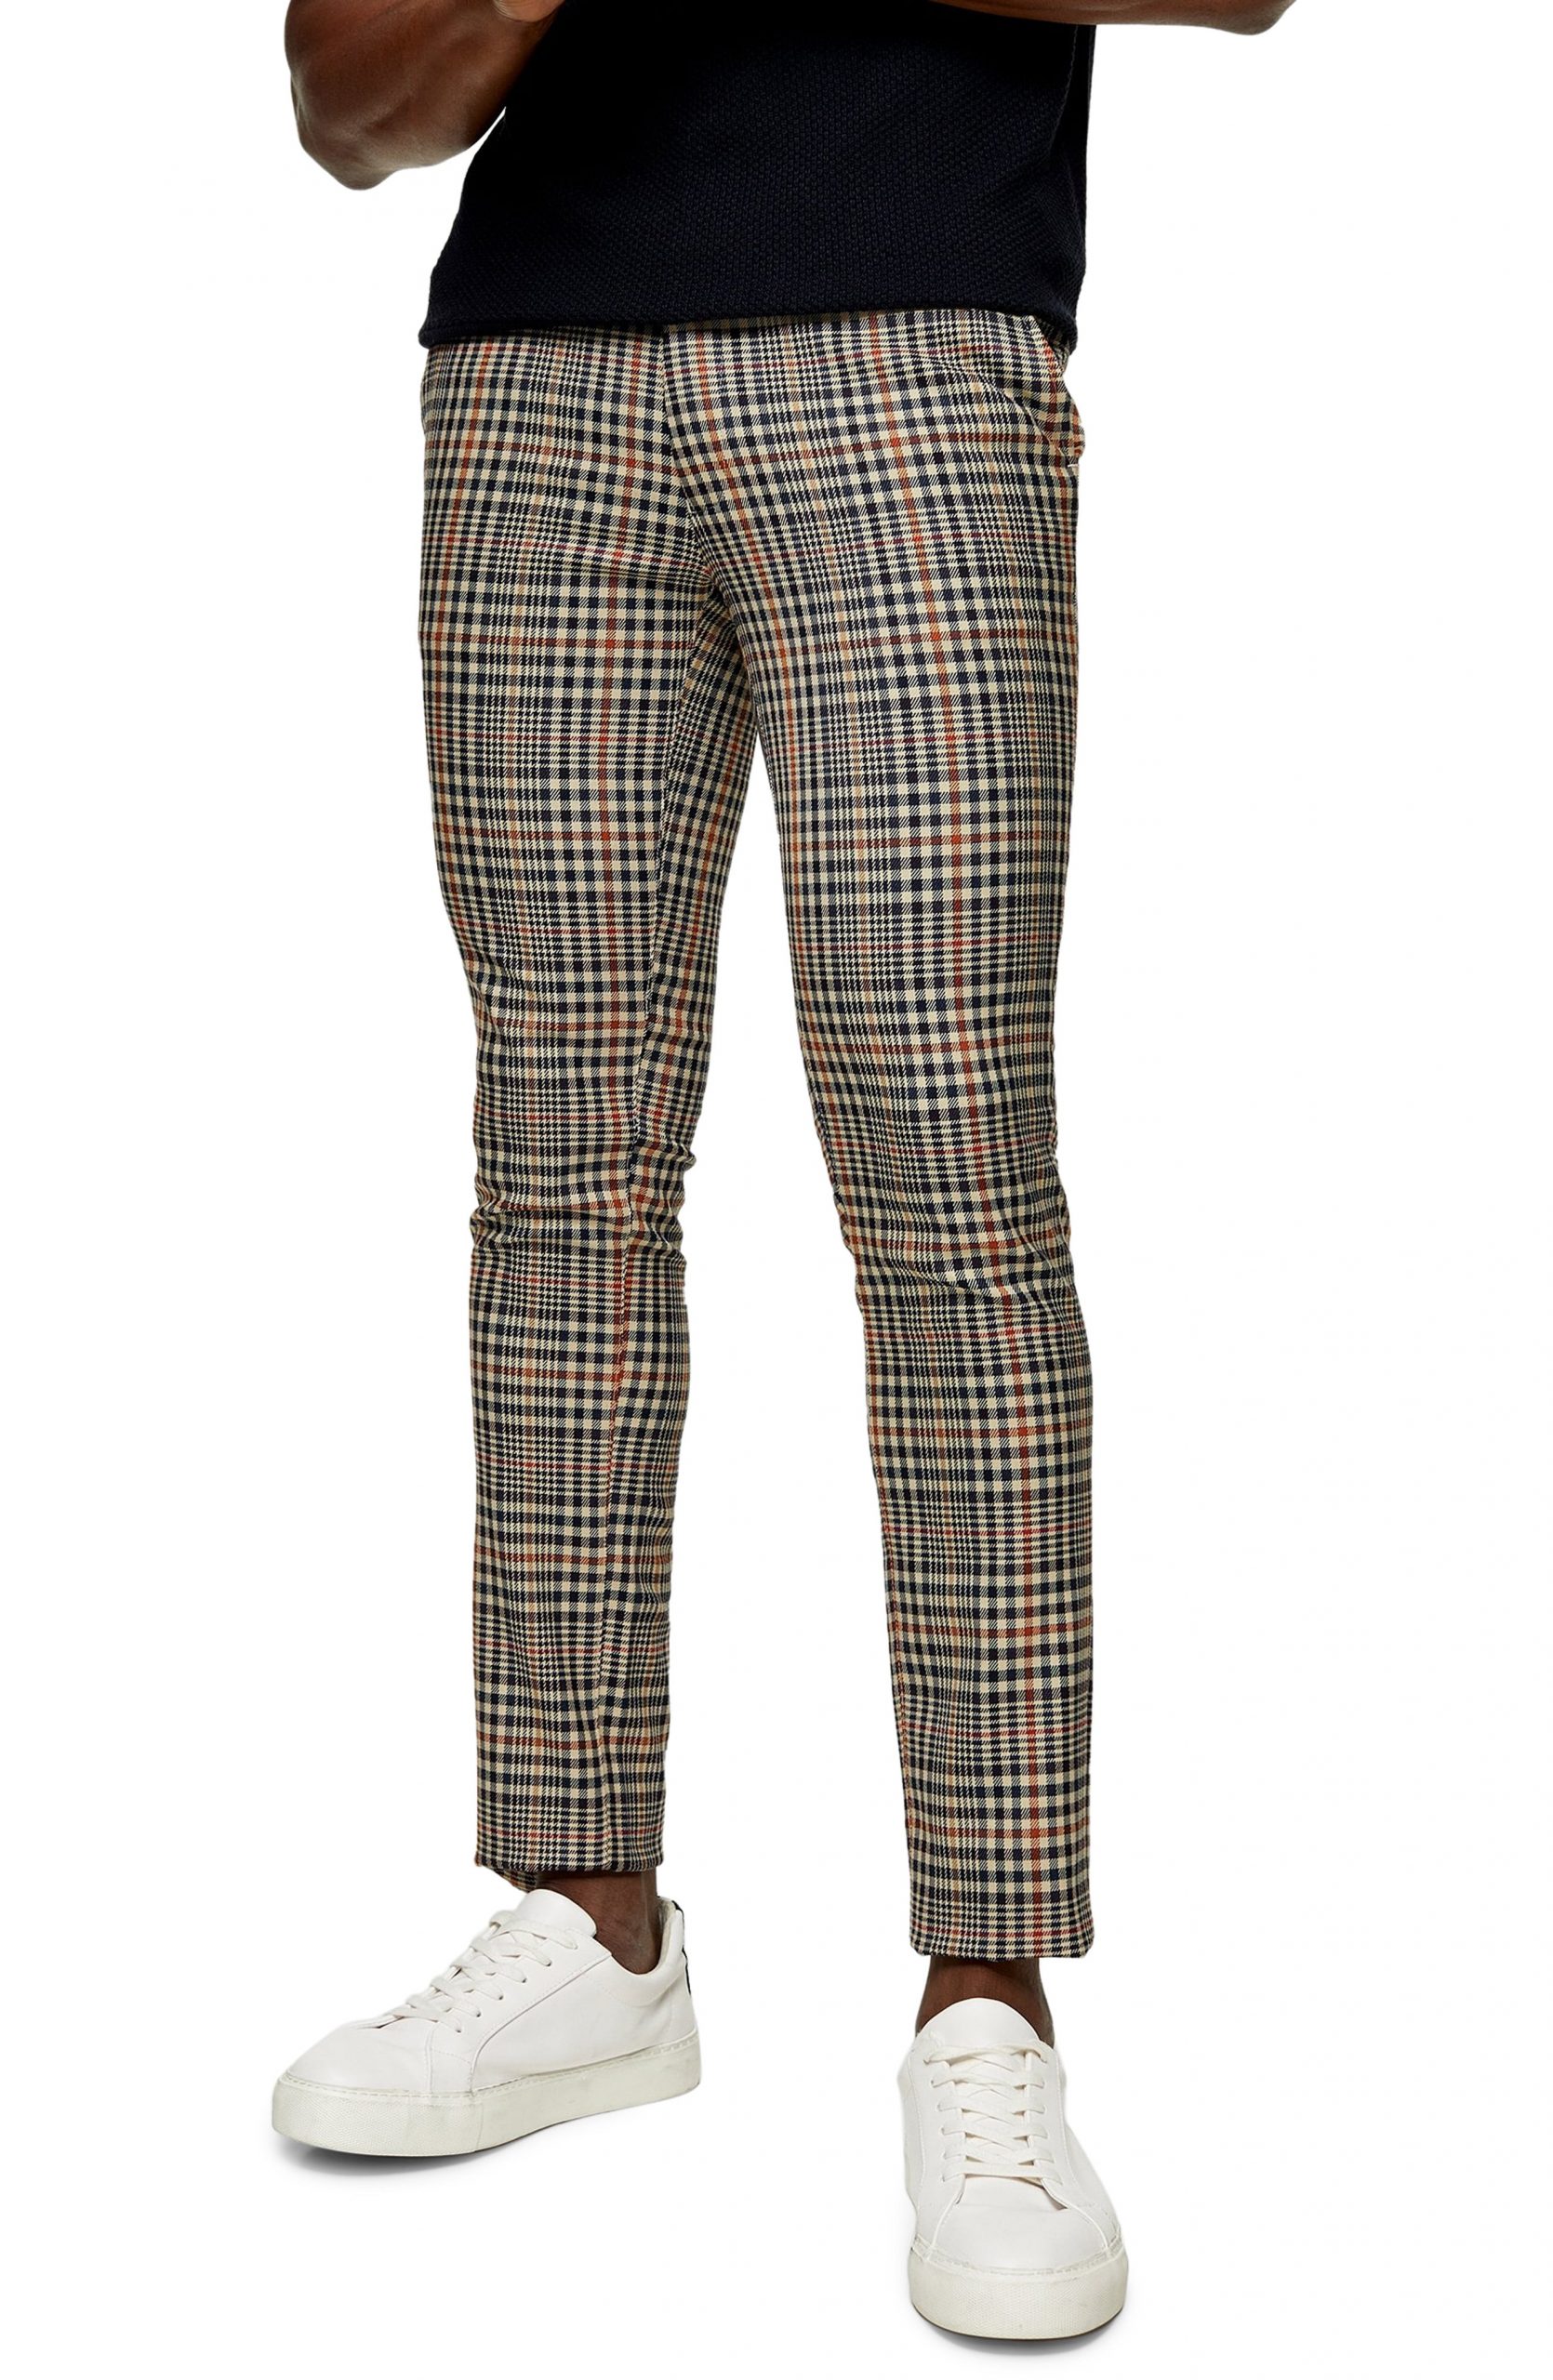 Men’s Topman Check Skinny Stretch Trousers, Size 30 x 32 - Beige | The ...